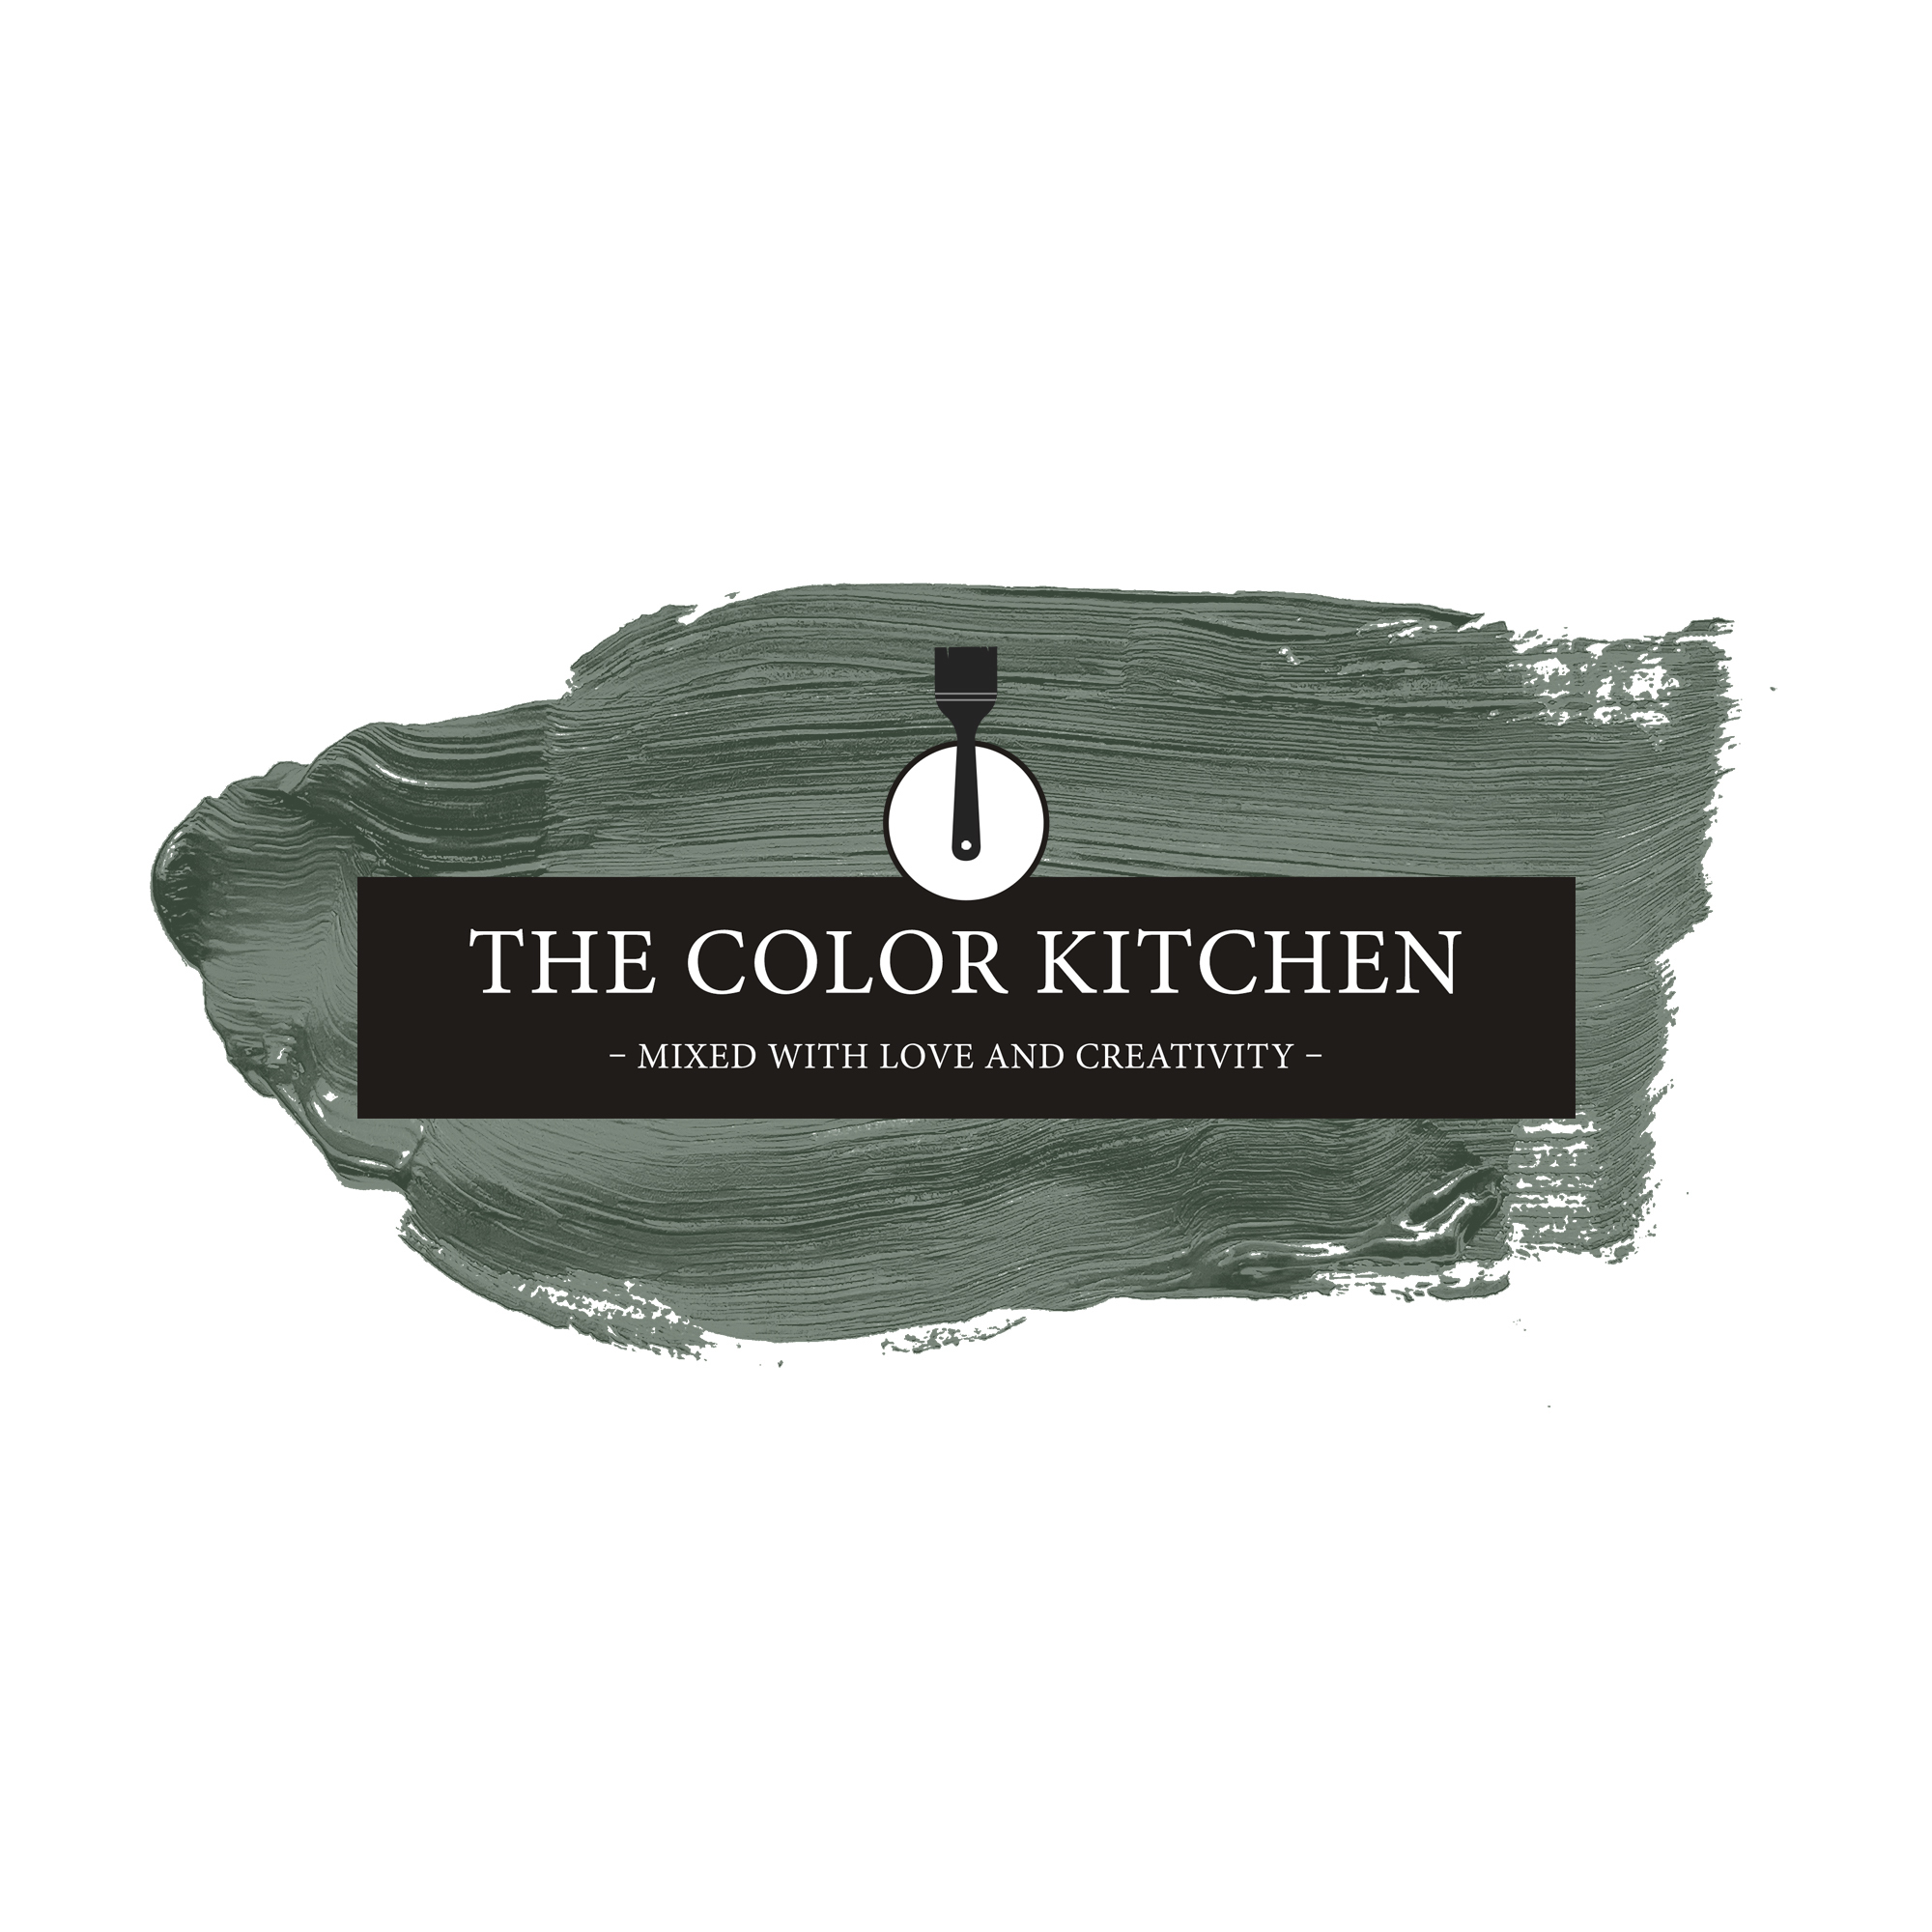 The Color Kitchen Ritzy Rosemary 2,5 l